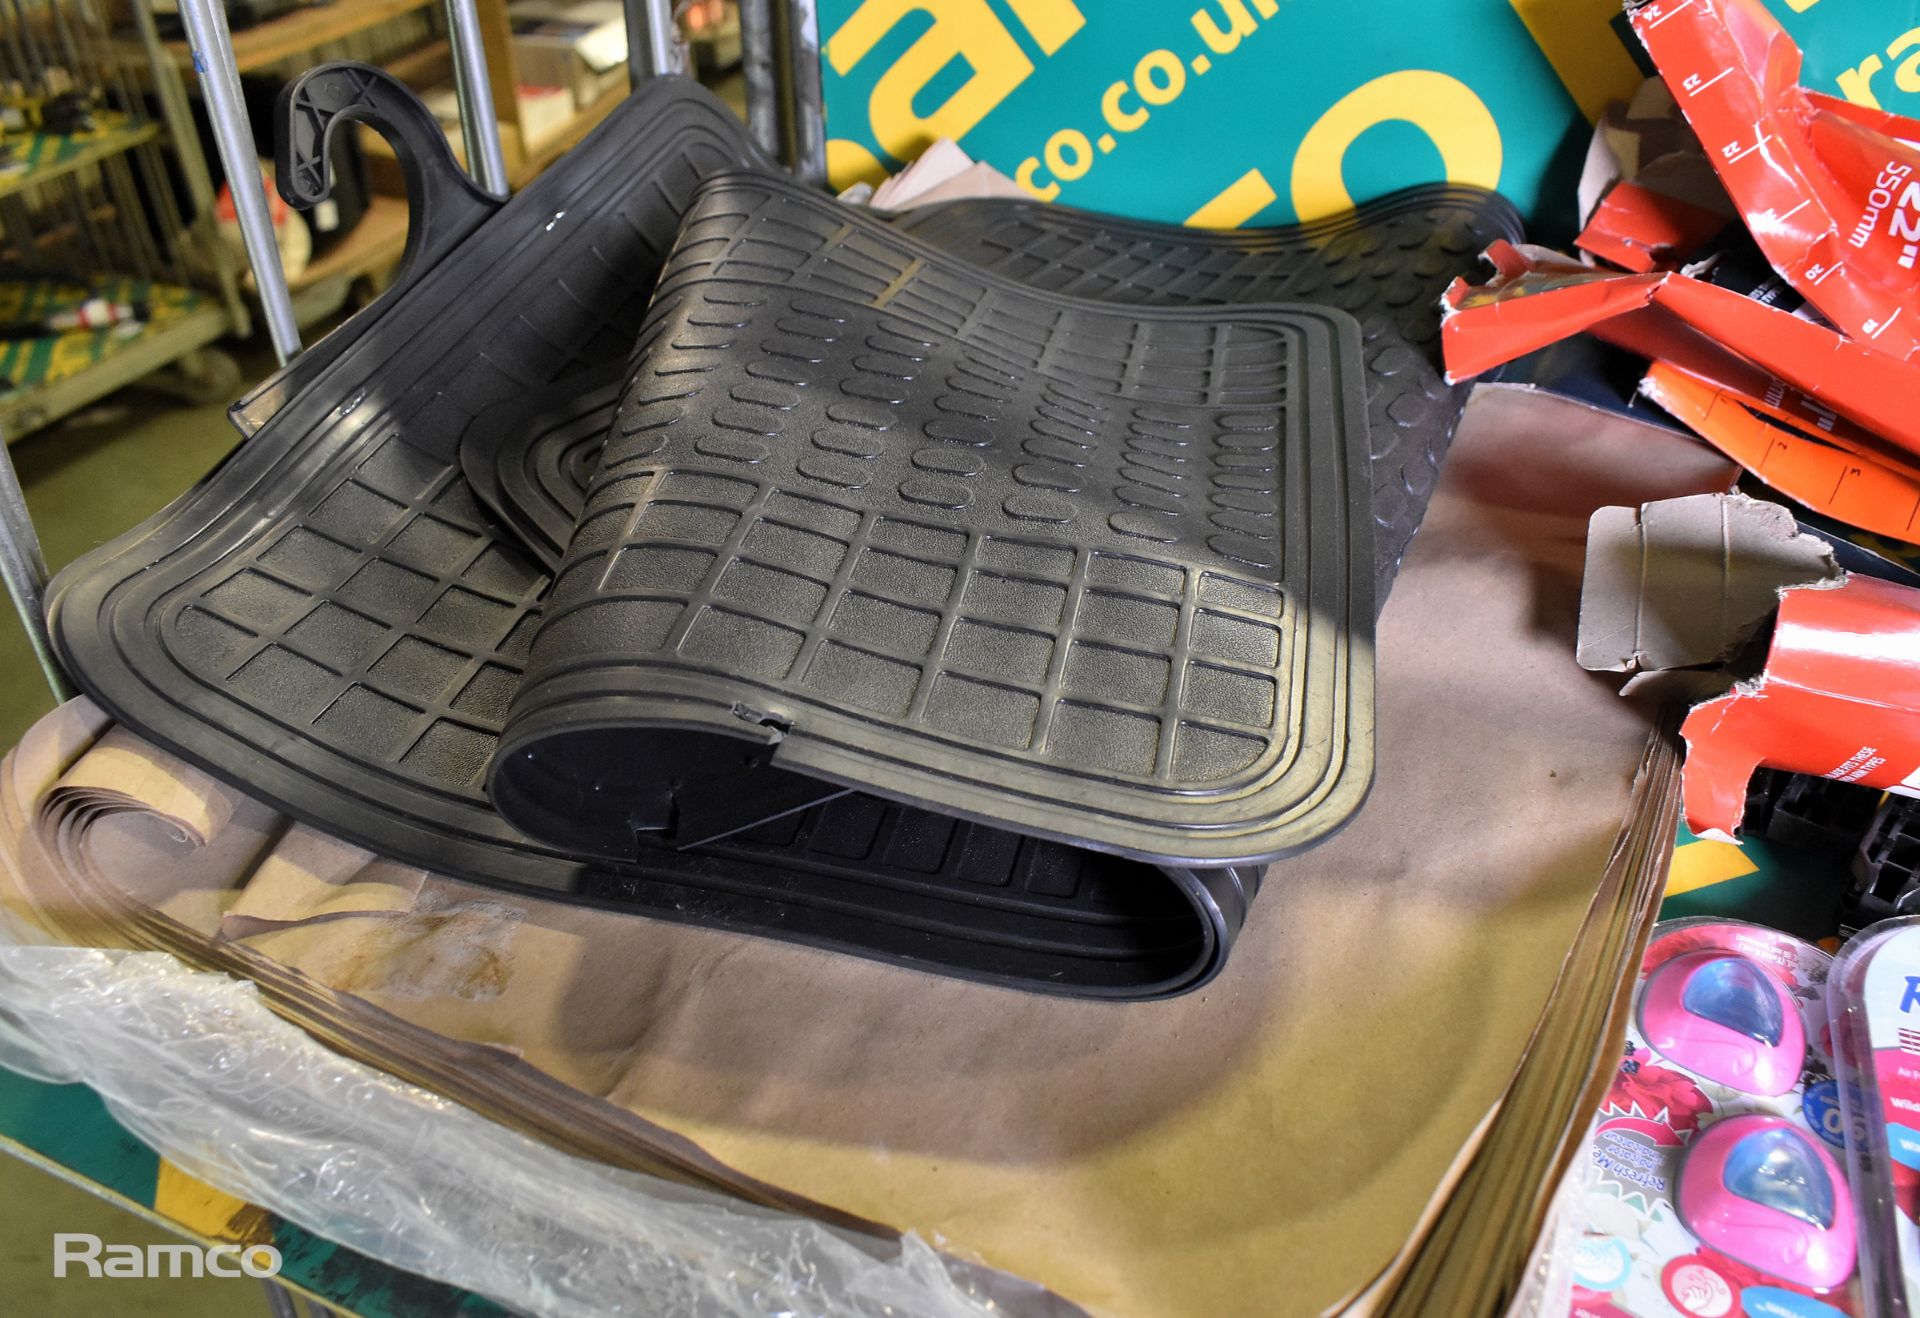 Assortment of car accessories - mats, phone holders, wiper blades, air fresheners - Image 2 of 6